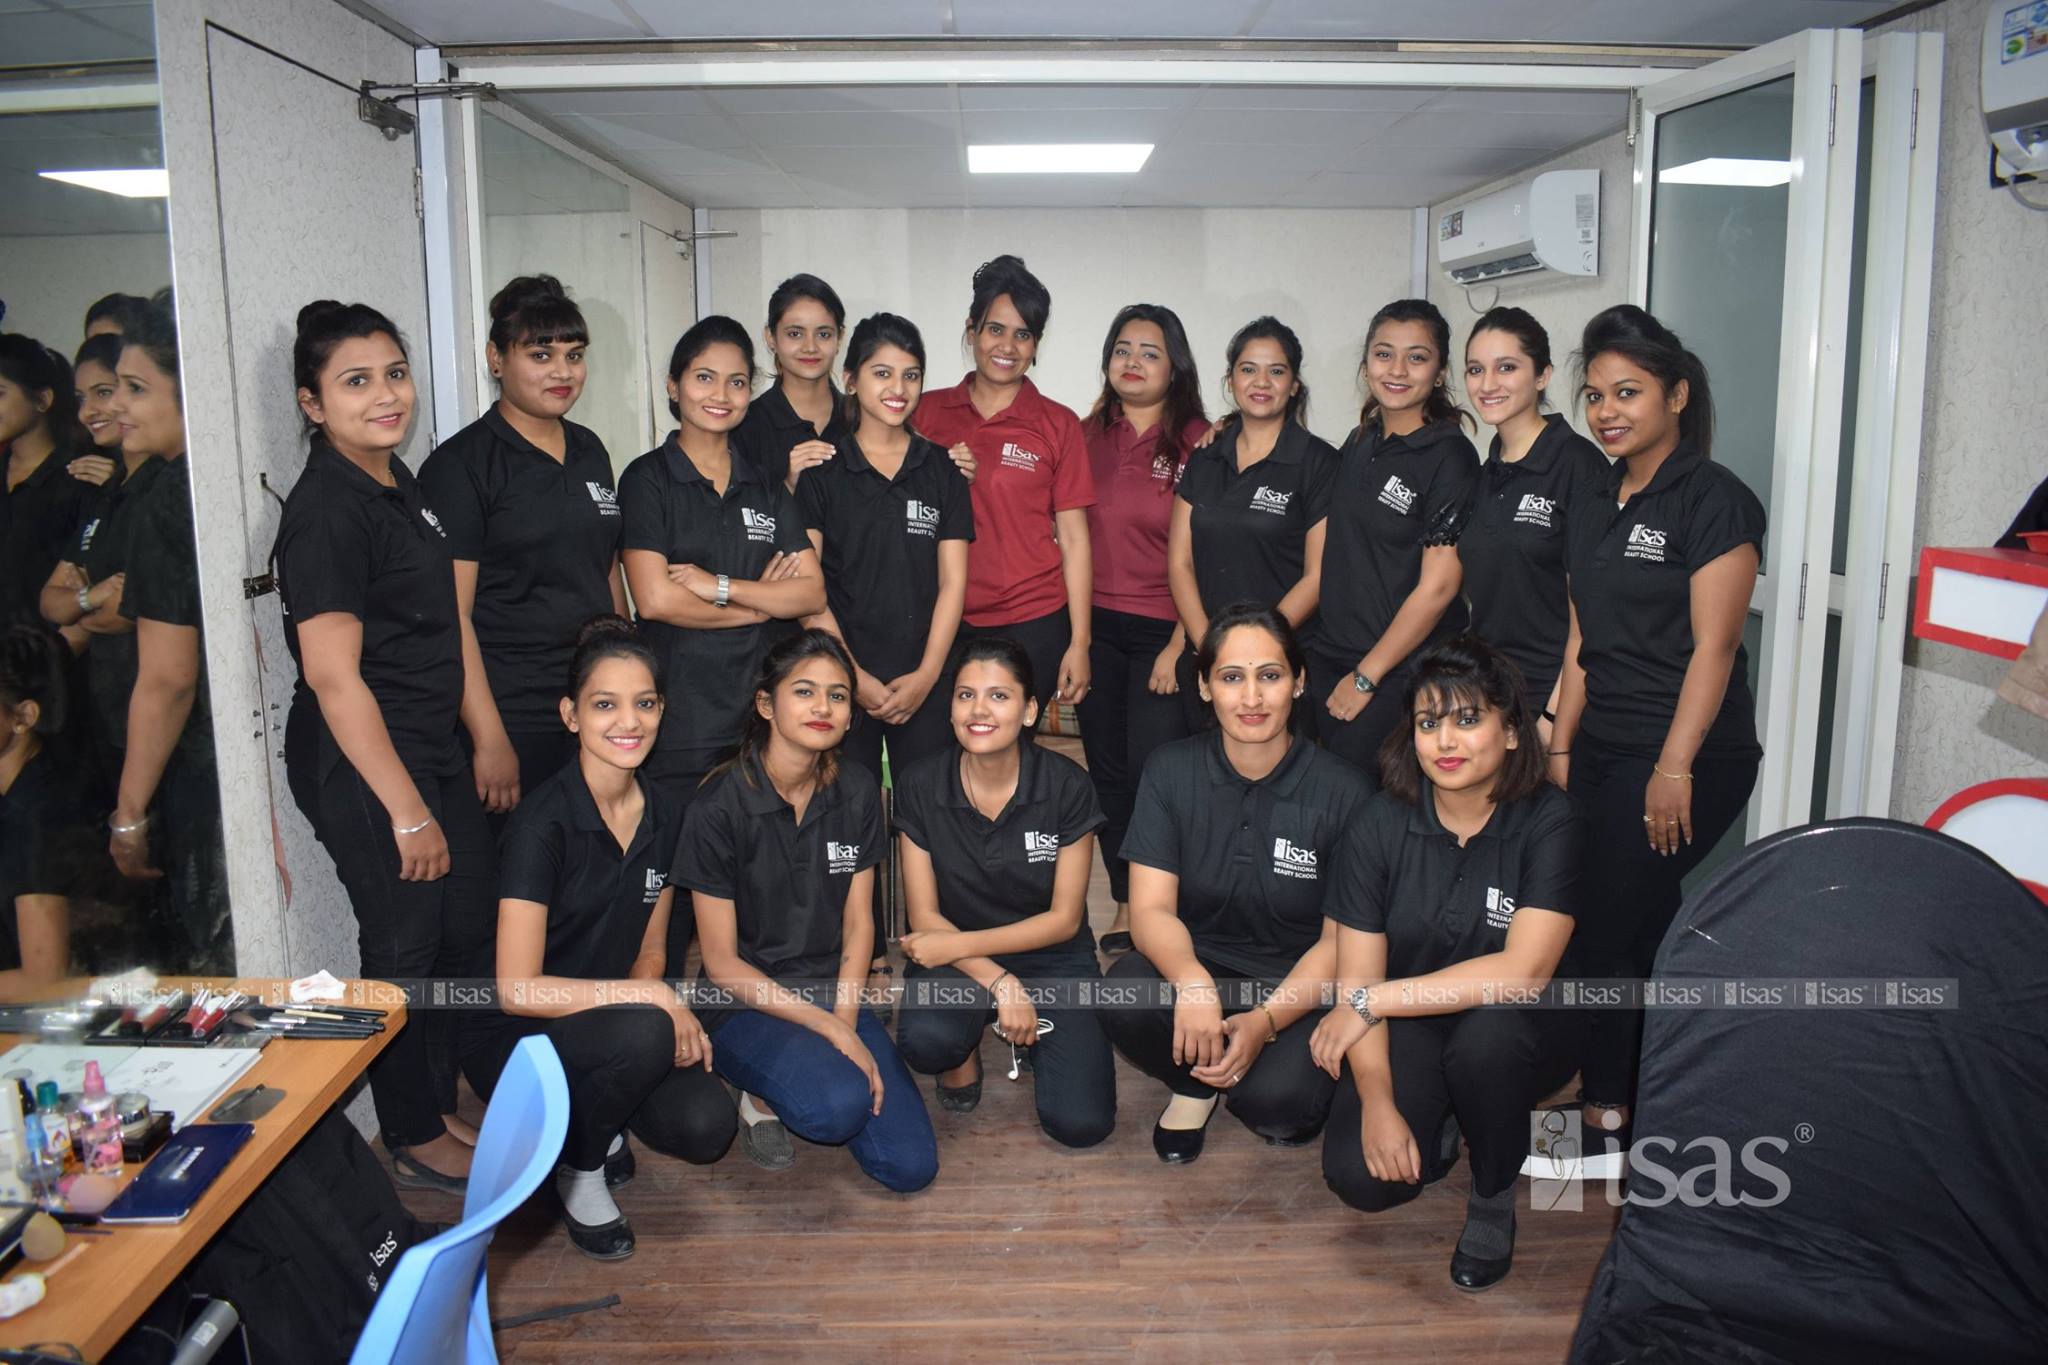 Hair & Makeup Partner” for Times And Trends Academy’s Annual Fashion Show ARTHA 2019